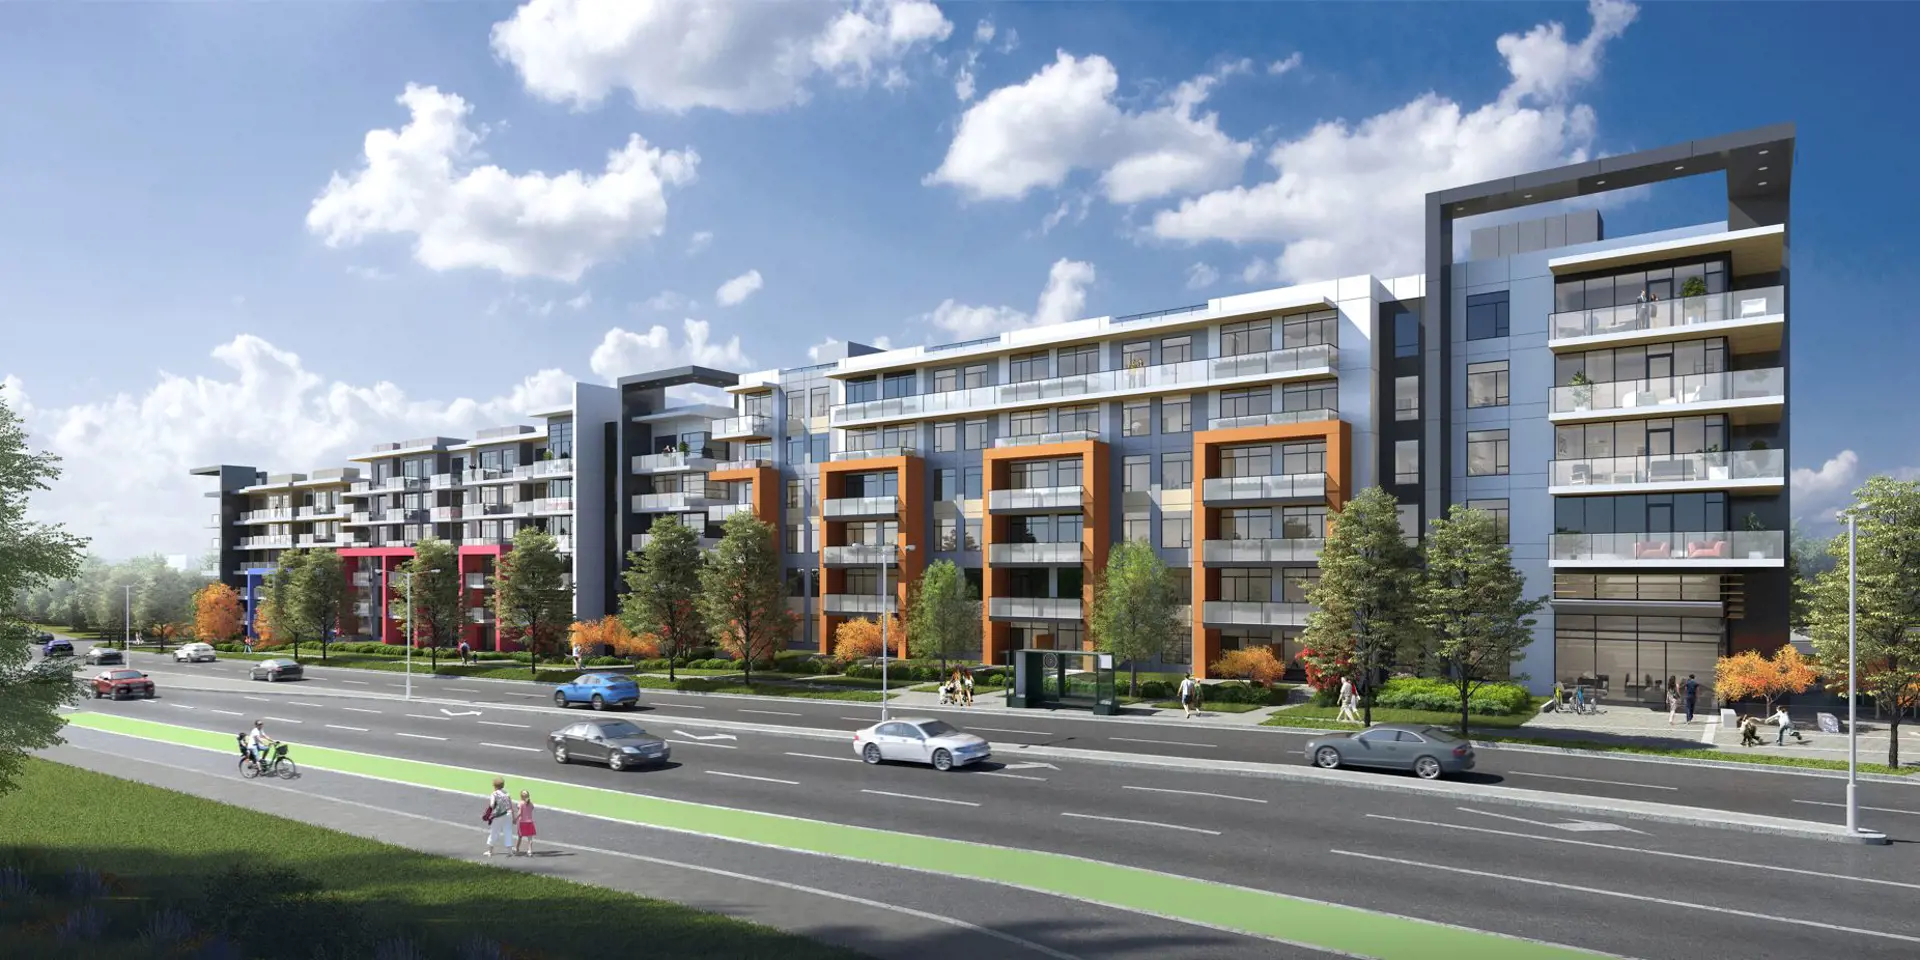 Nova by Mortise is a master-planned community of 339 condos and 31 townhomes.